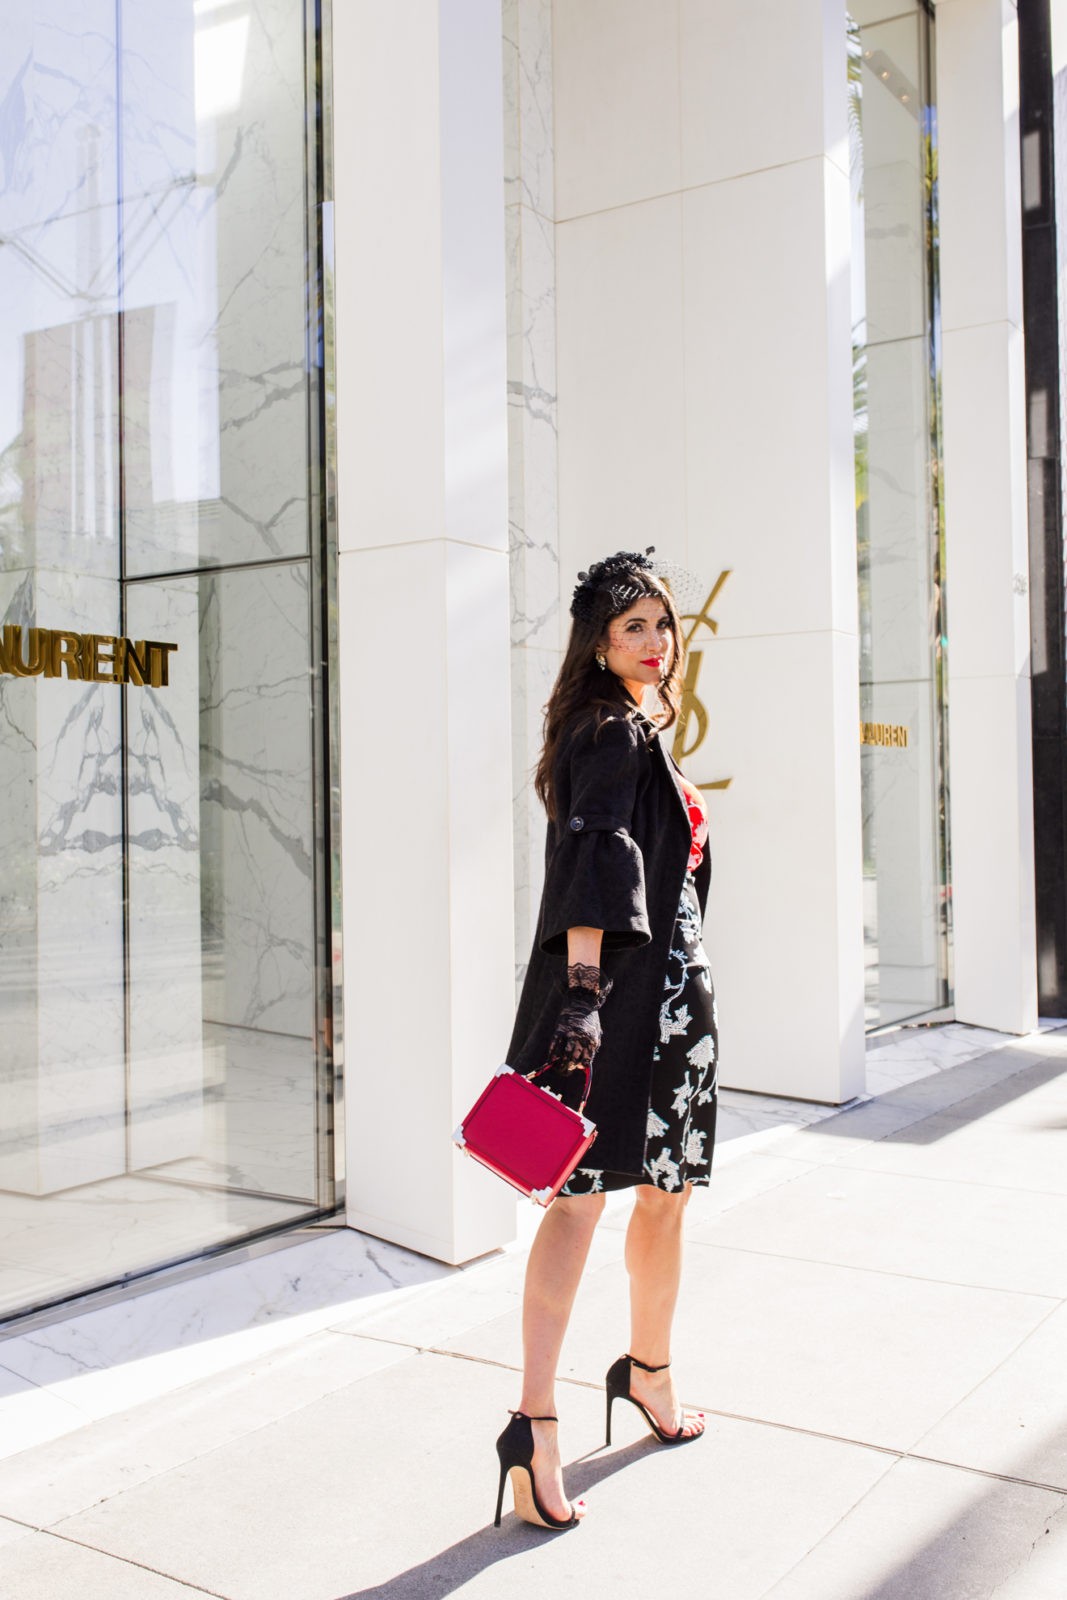 Romantic Date Night Dresses featured by top US fashion blogger Laura Lily; Image of a woman wearing DVF dress, Stuart Weitzman sandals, Asos Veil, vintage jacket, Izzy + Ali bag and Lace gloves from eBay.